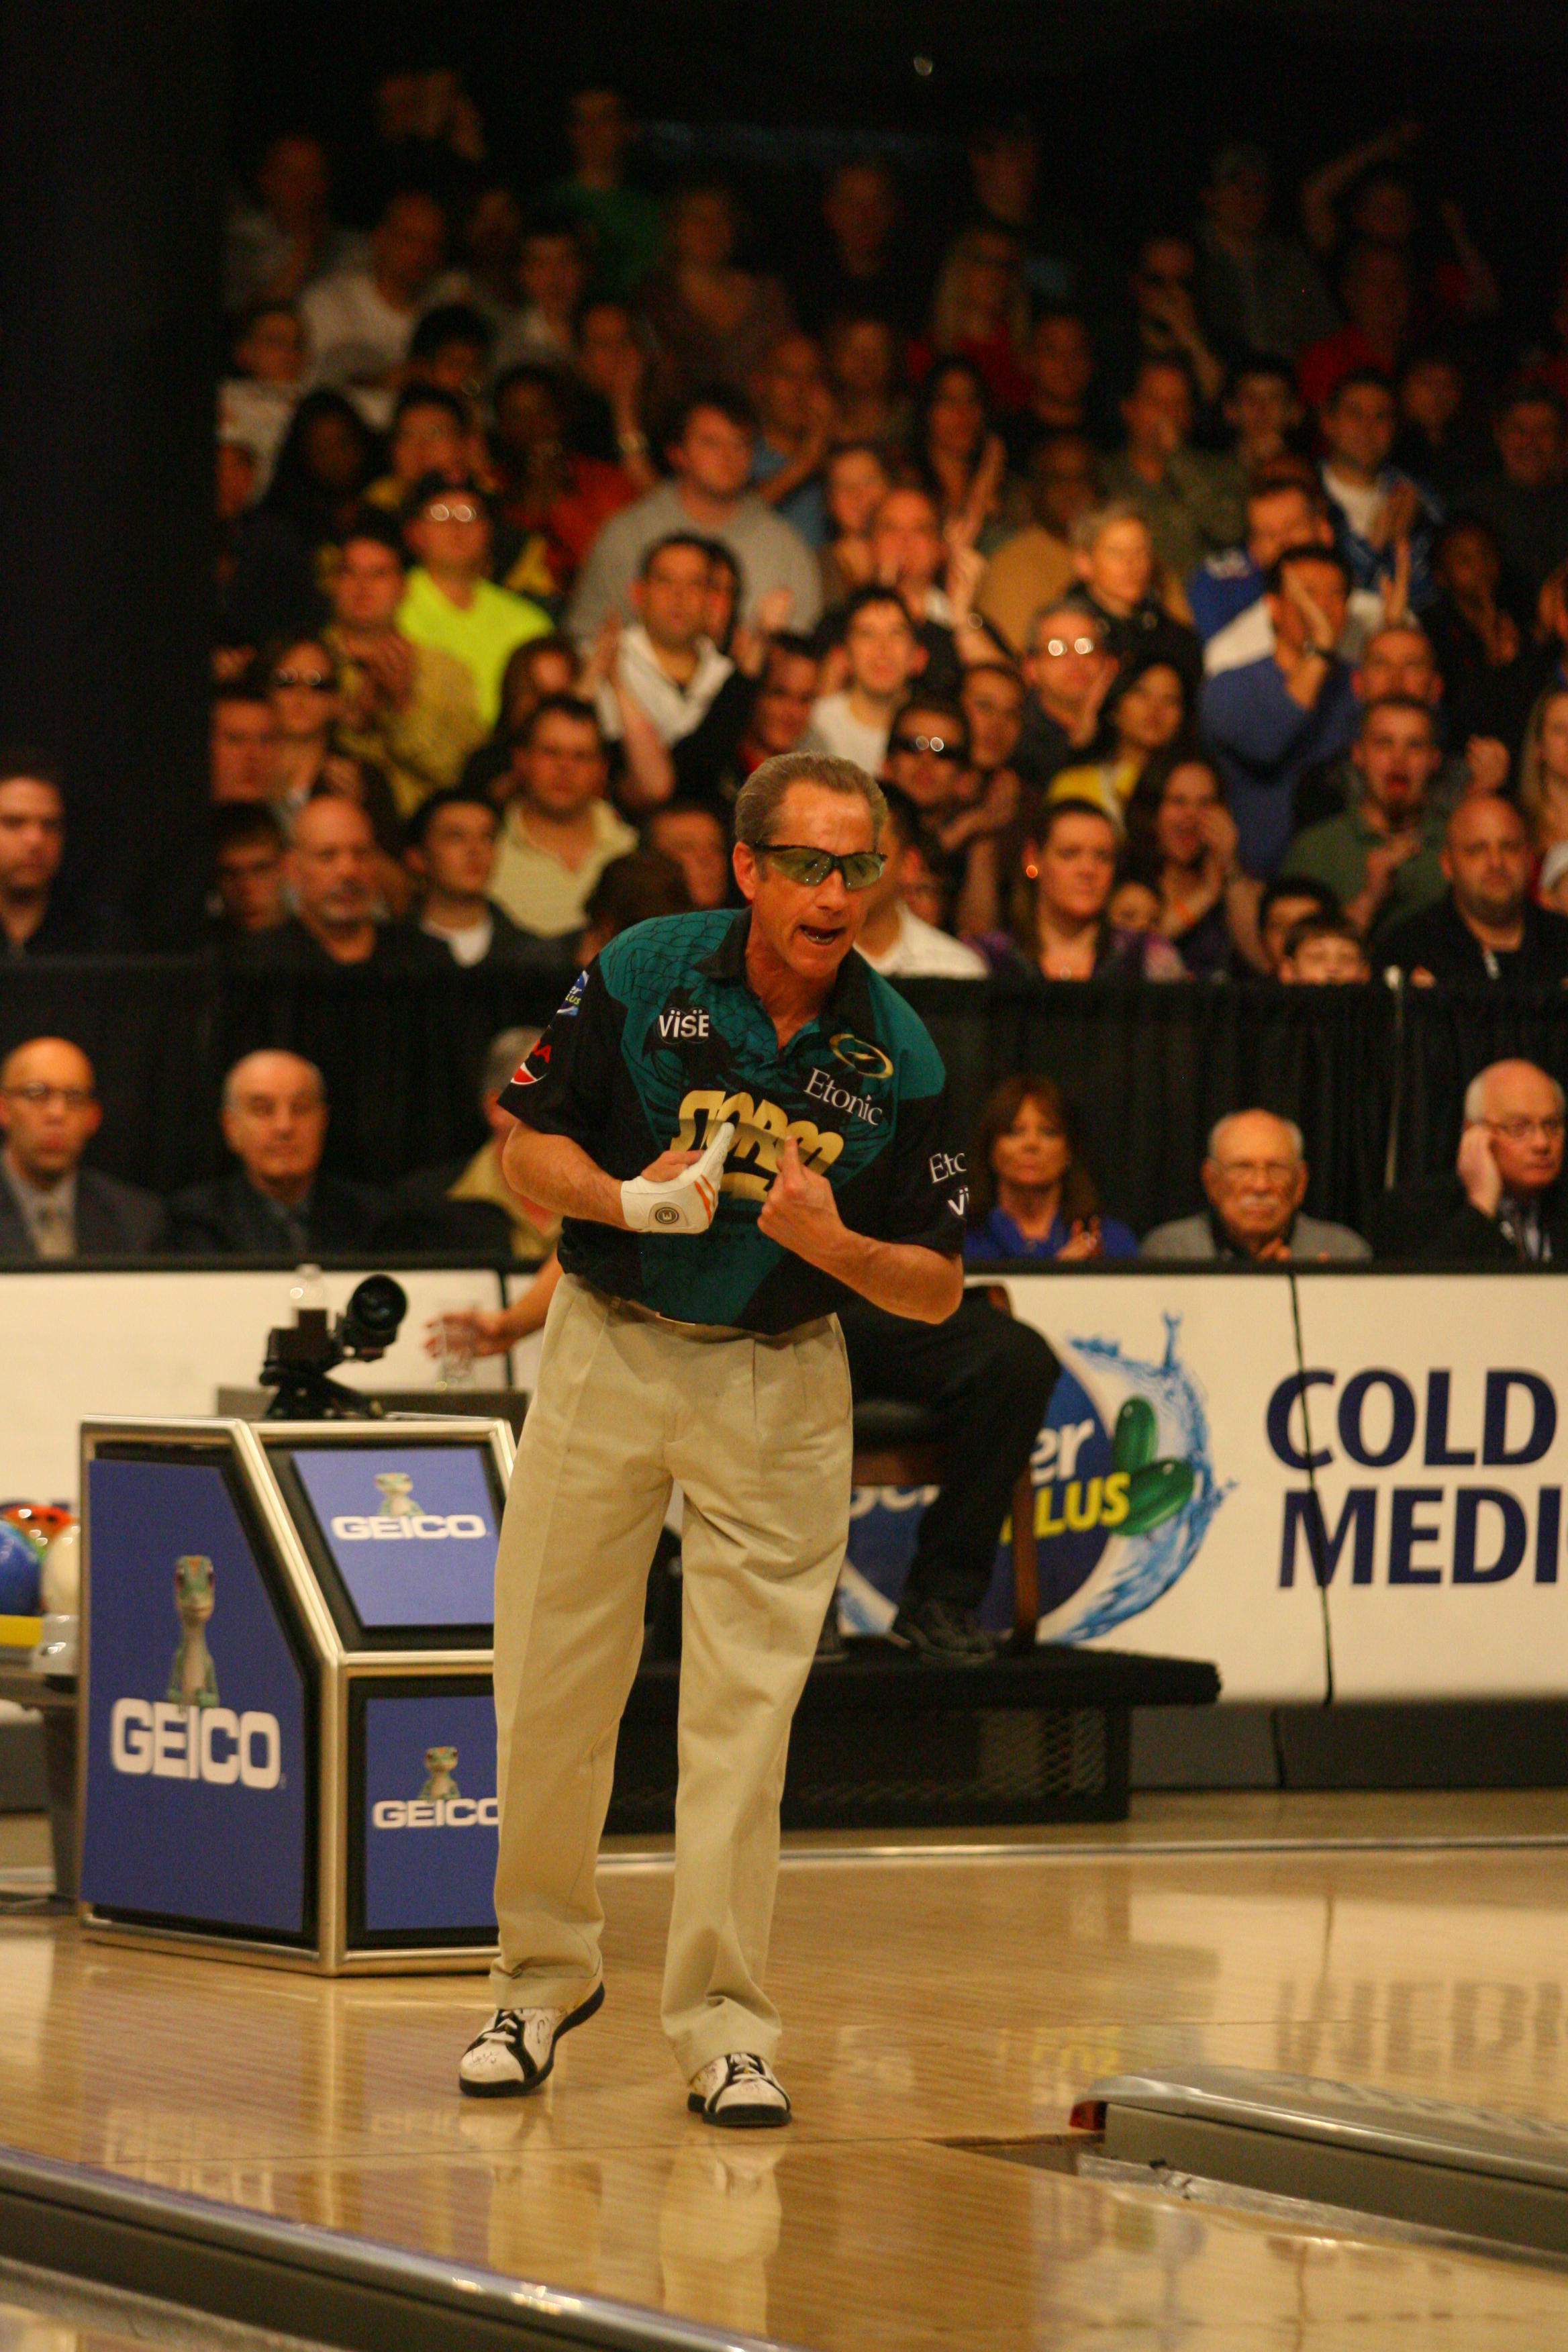 BOWL PBAs Greatest TV Finals Debut on YouTube as “PBA Modern Classics”